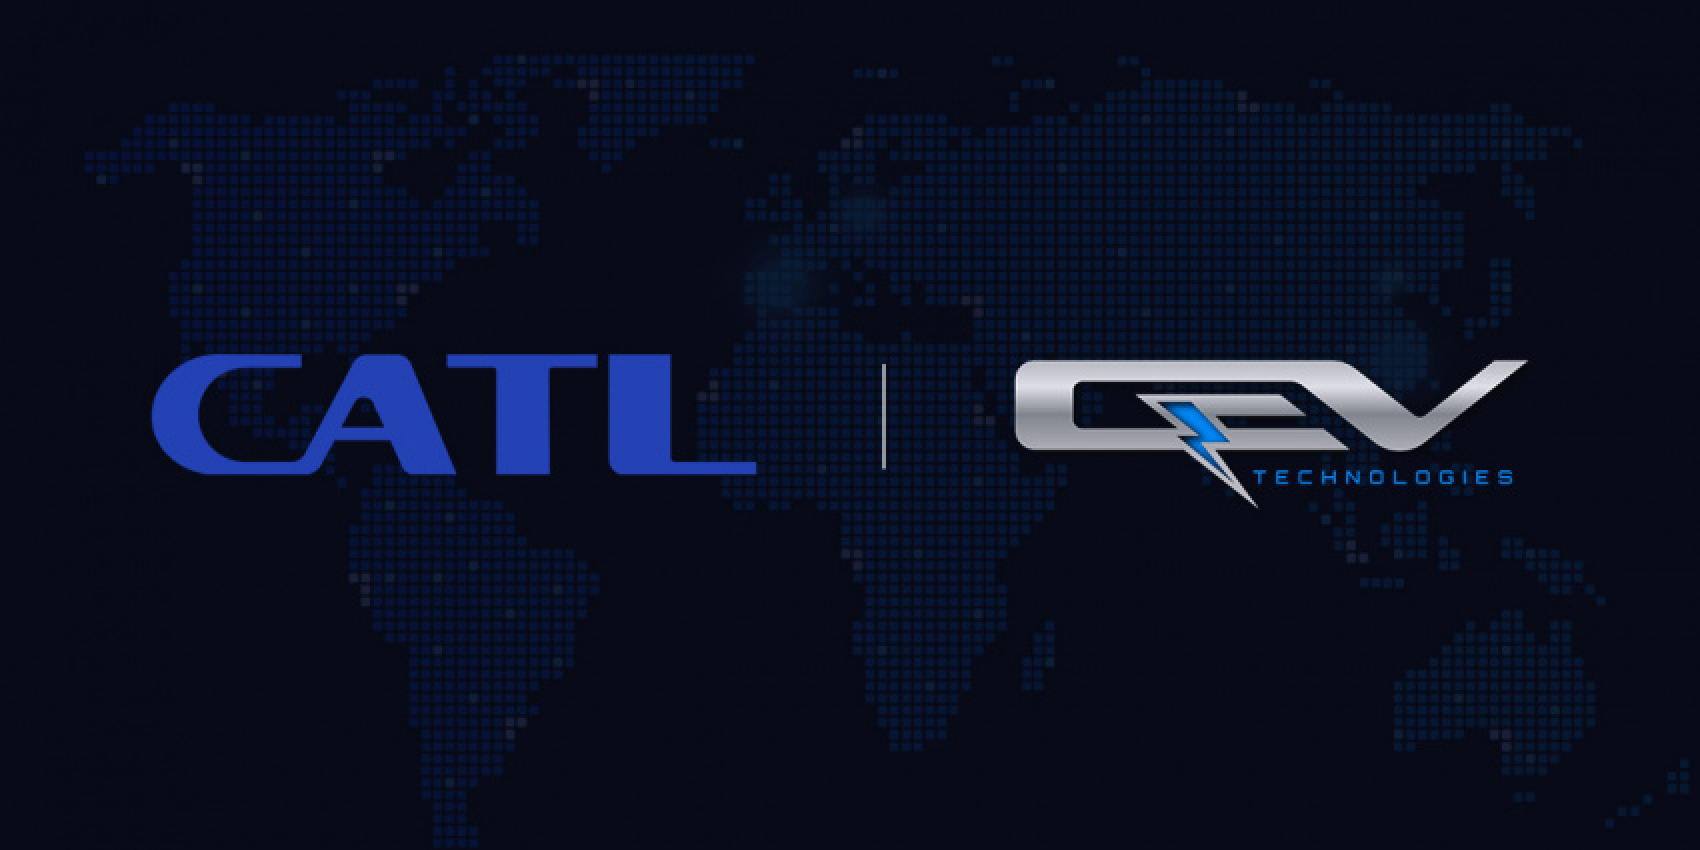 autos, battery & fuel cell, cars, electric vehicle, batteries, catl, europe, qev technologies, suppliers, qev designated as catl’s european sales partner